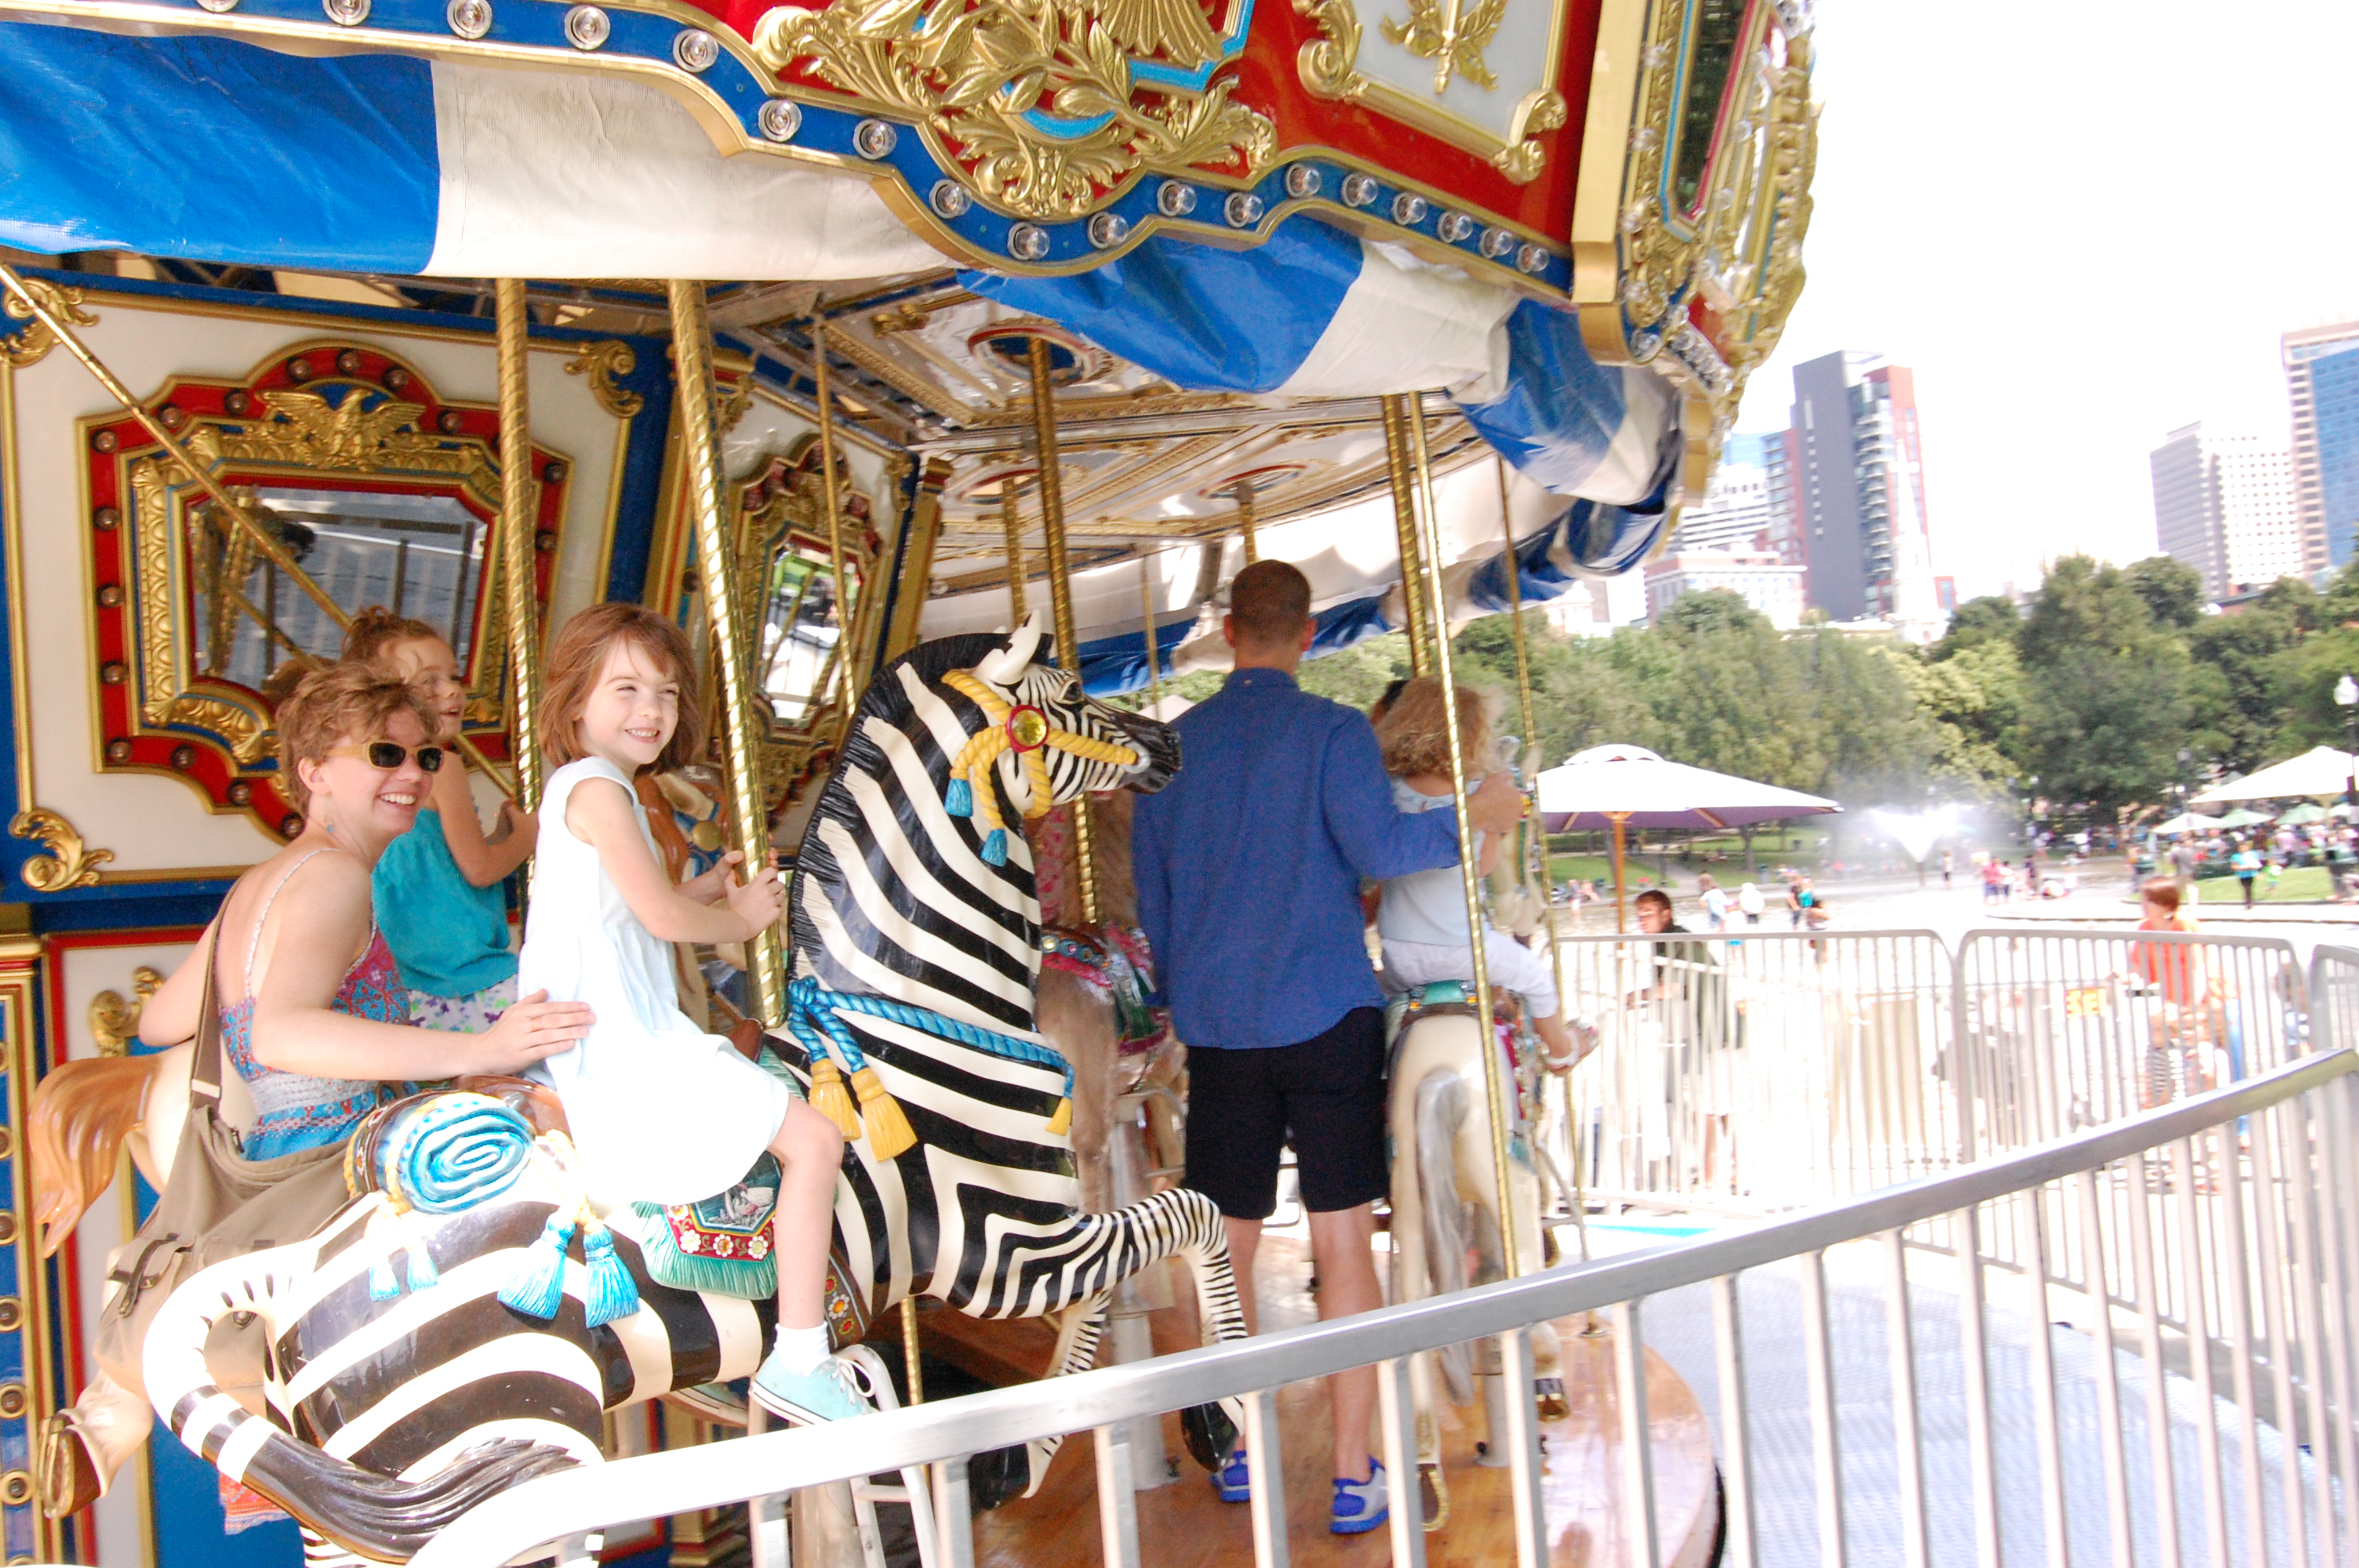 Riding the carousel at Boston Commons